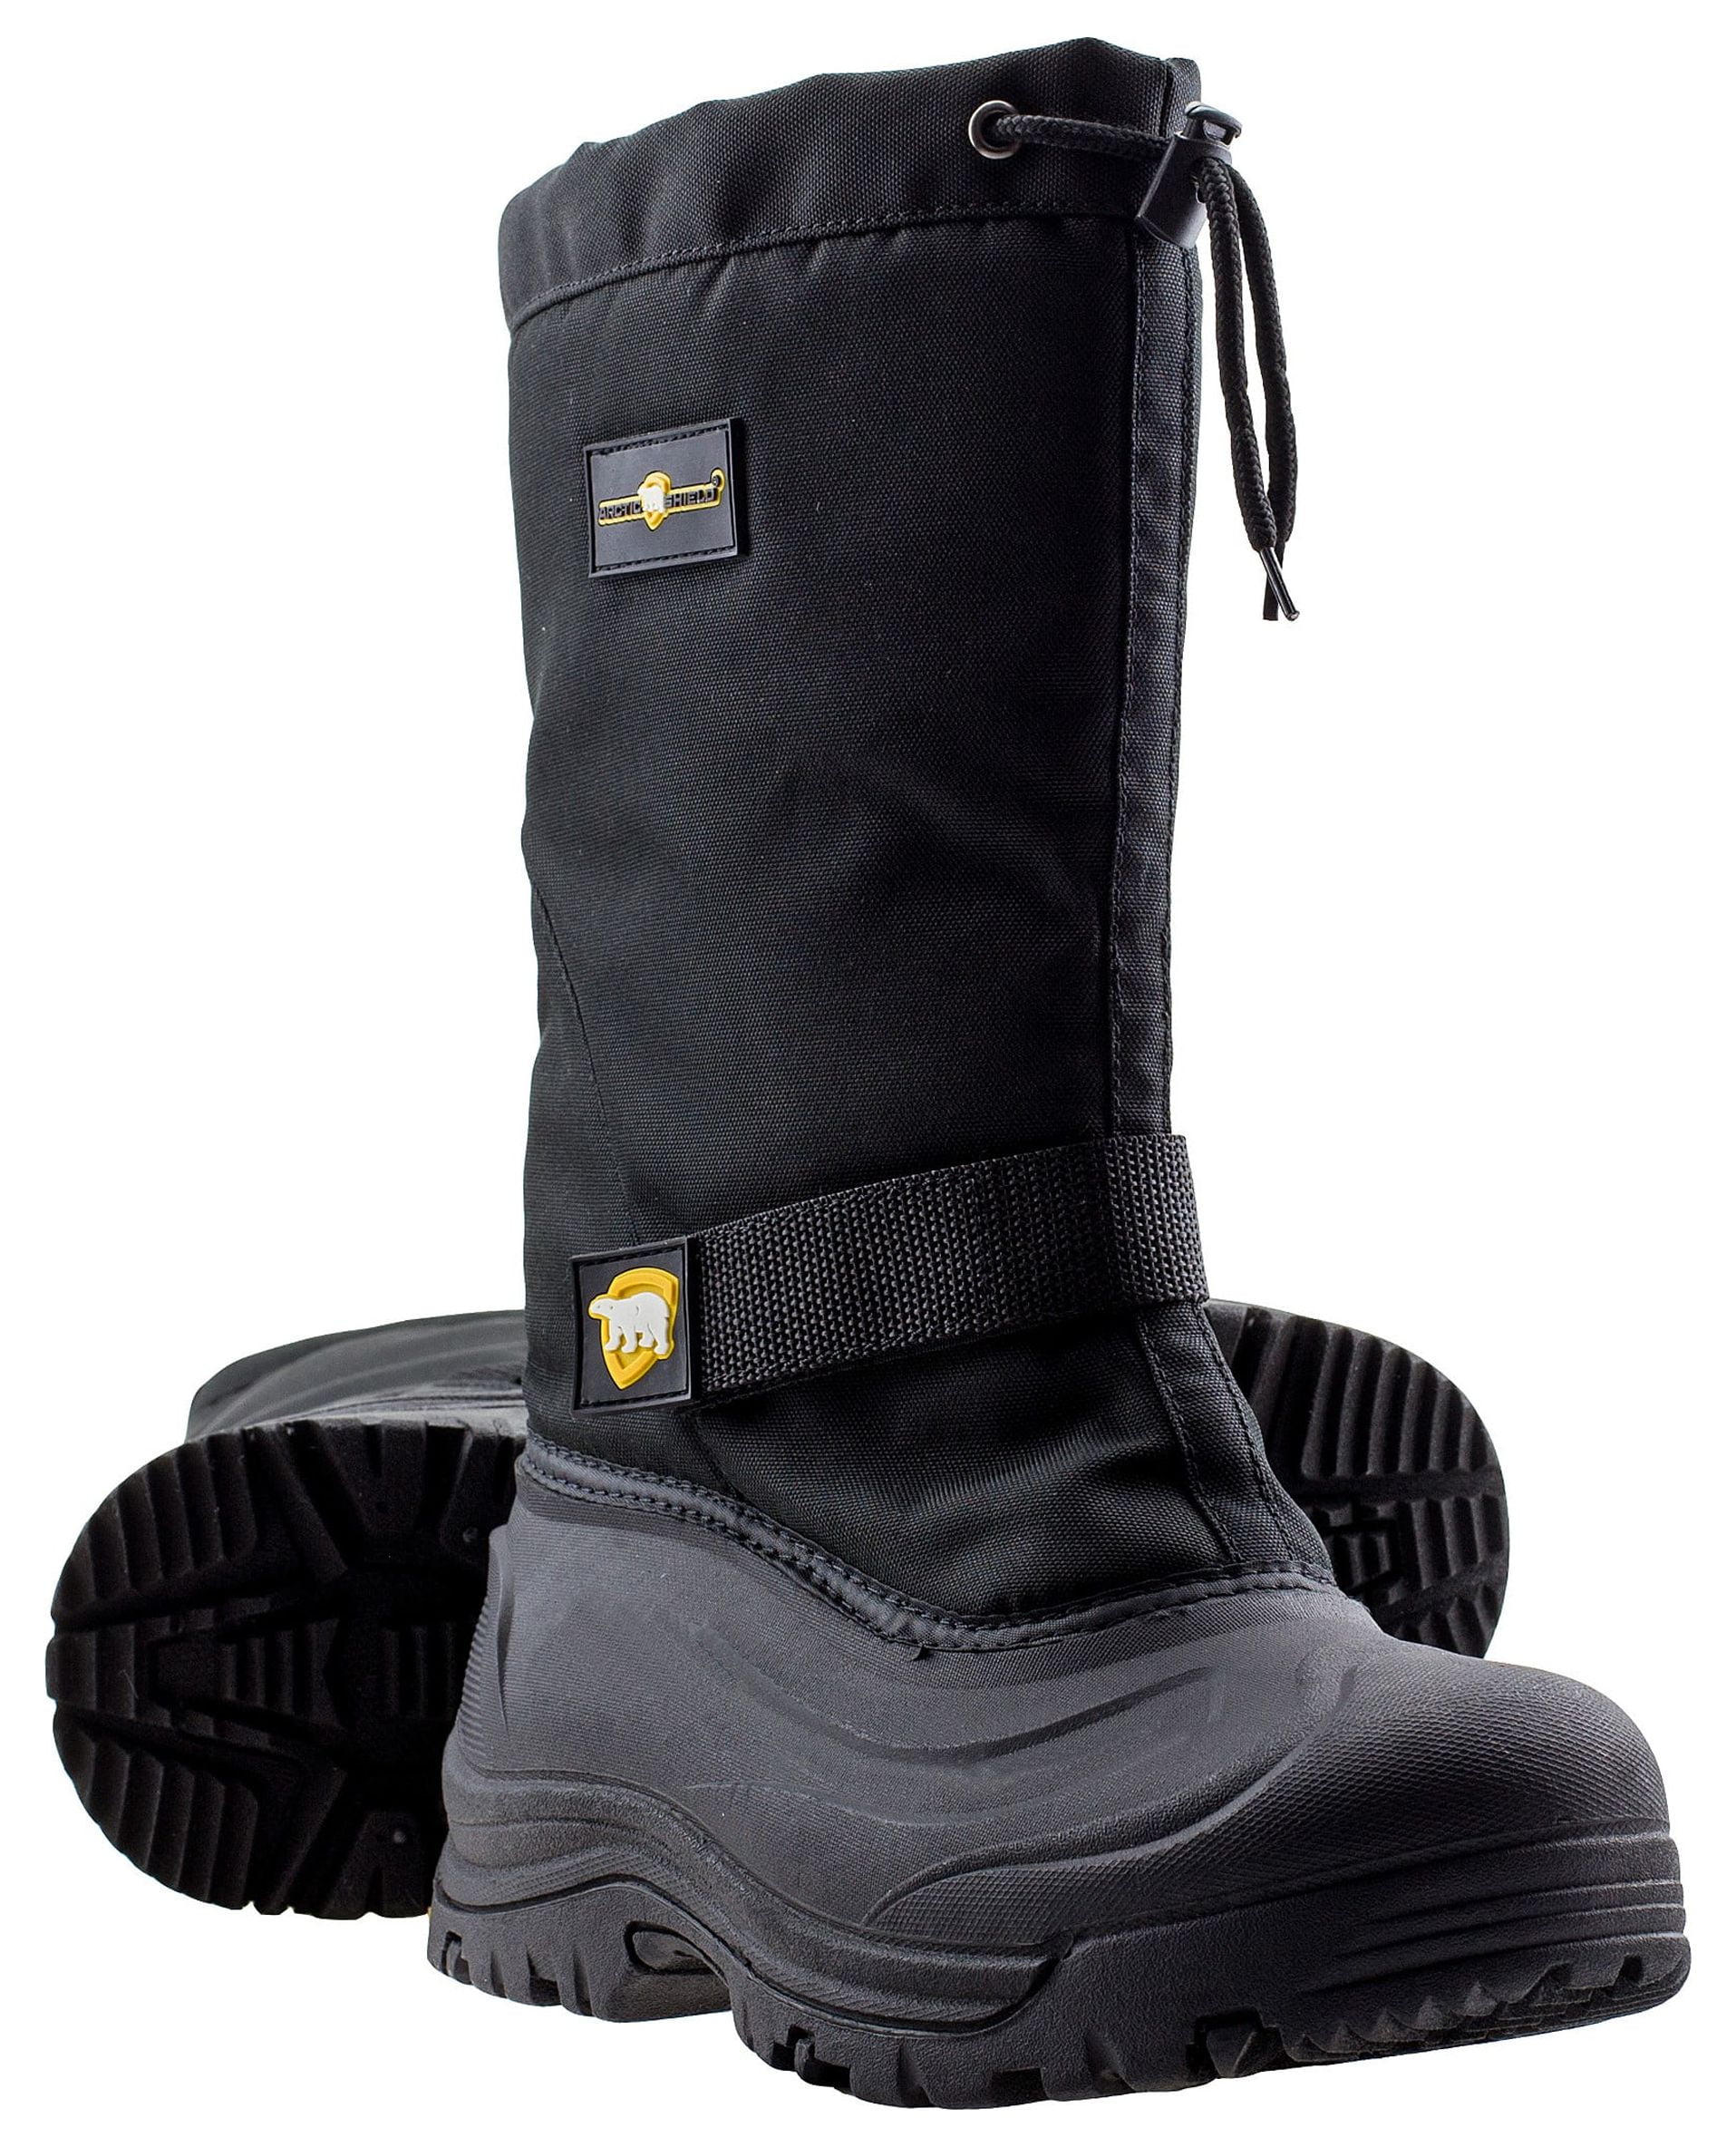 Men's Snow Boots Waterproof Winter Boots Insulated Cold Weather